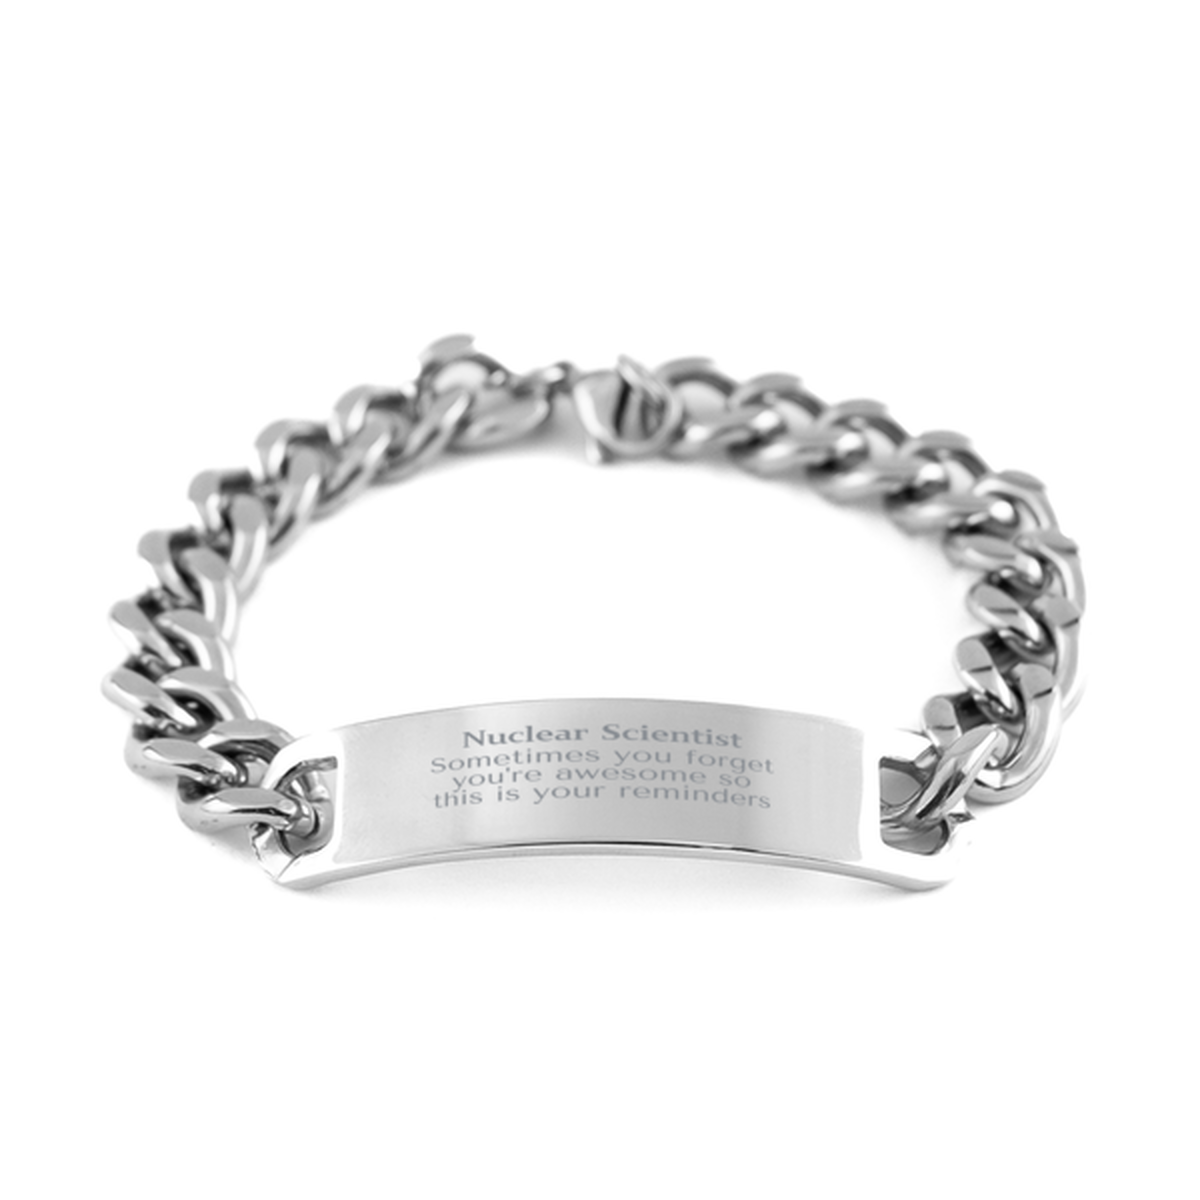 Sentimental Nuclear Scientist Cuban Chain Stainless Steel Bracelet, Nuclear Scientist Sometimes you forget you're awesome so this is your reminders, Graduation Christmas Birthday Gifts for Nuclear Scientist, Men, Women, Coworkers